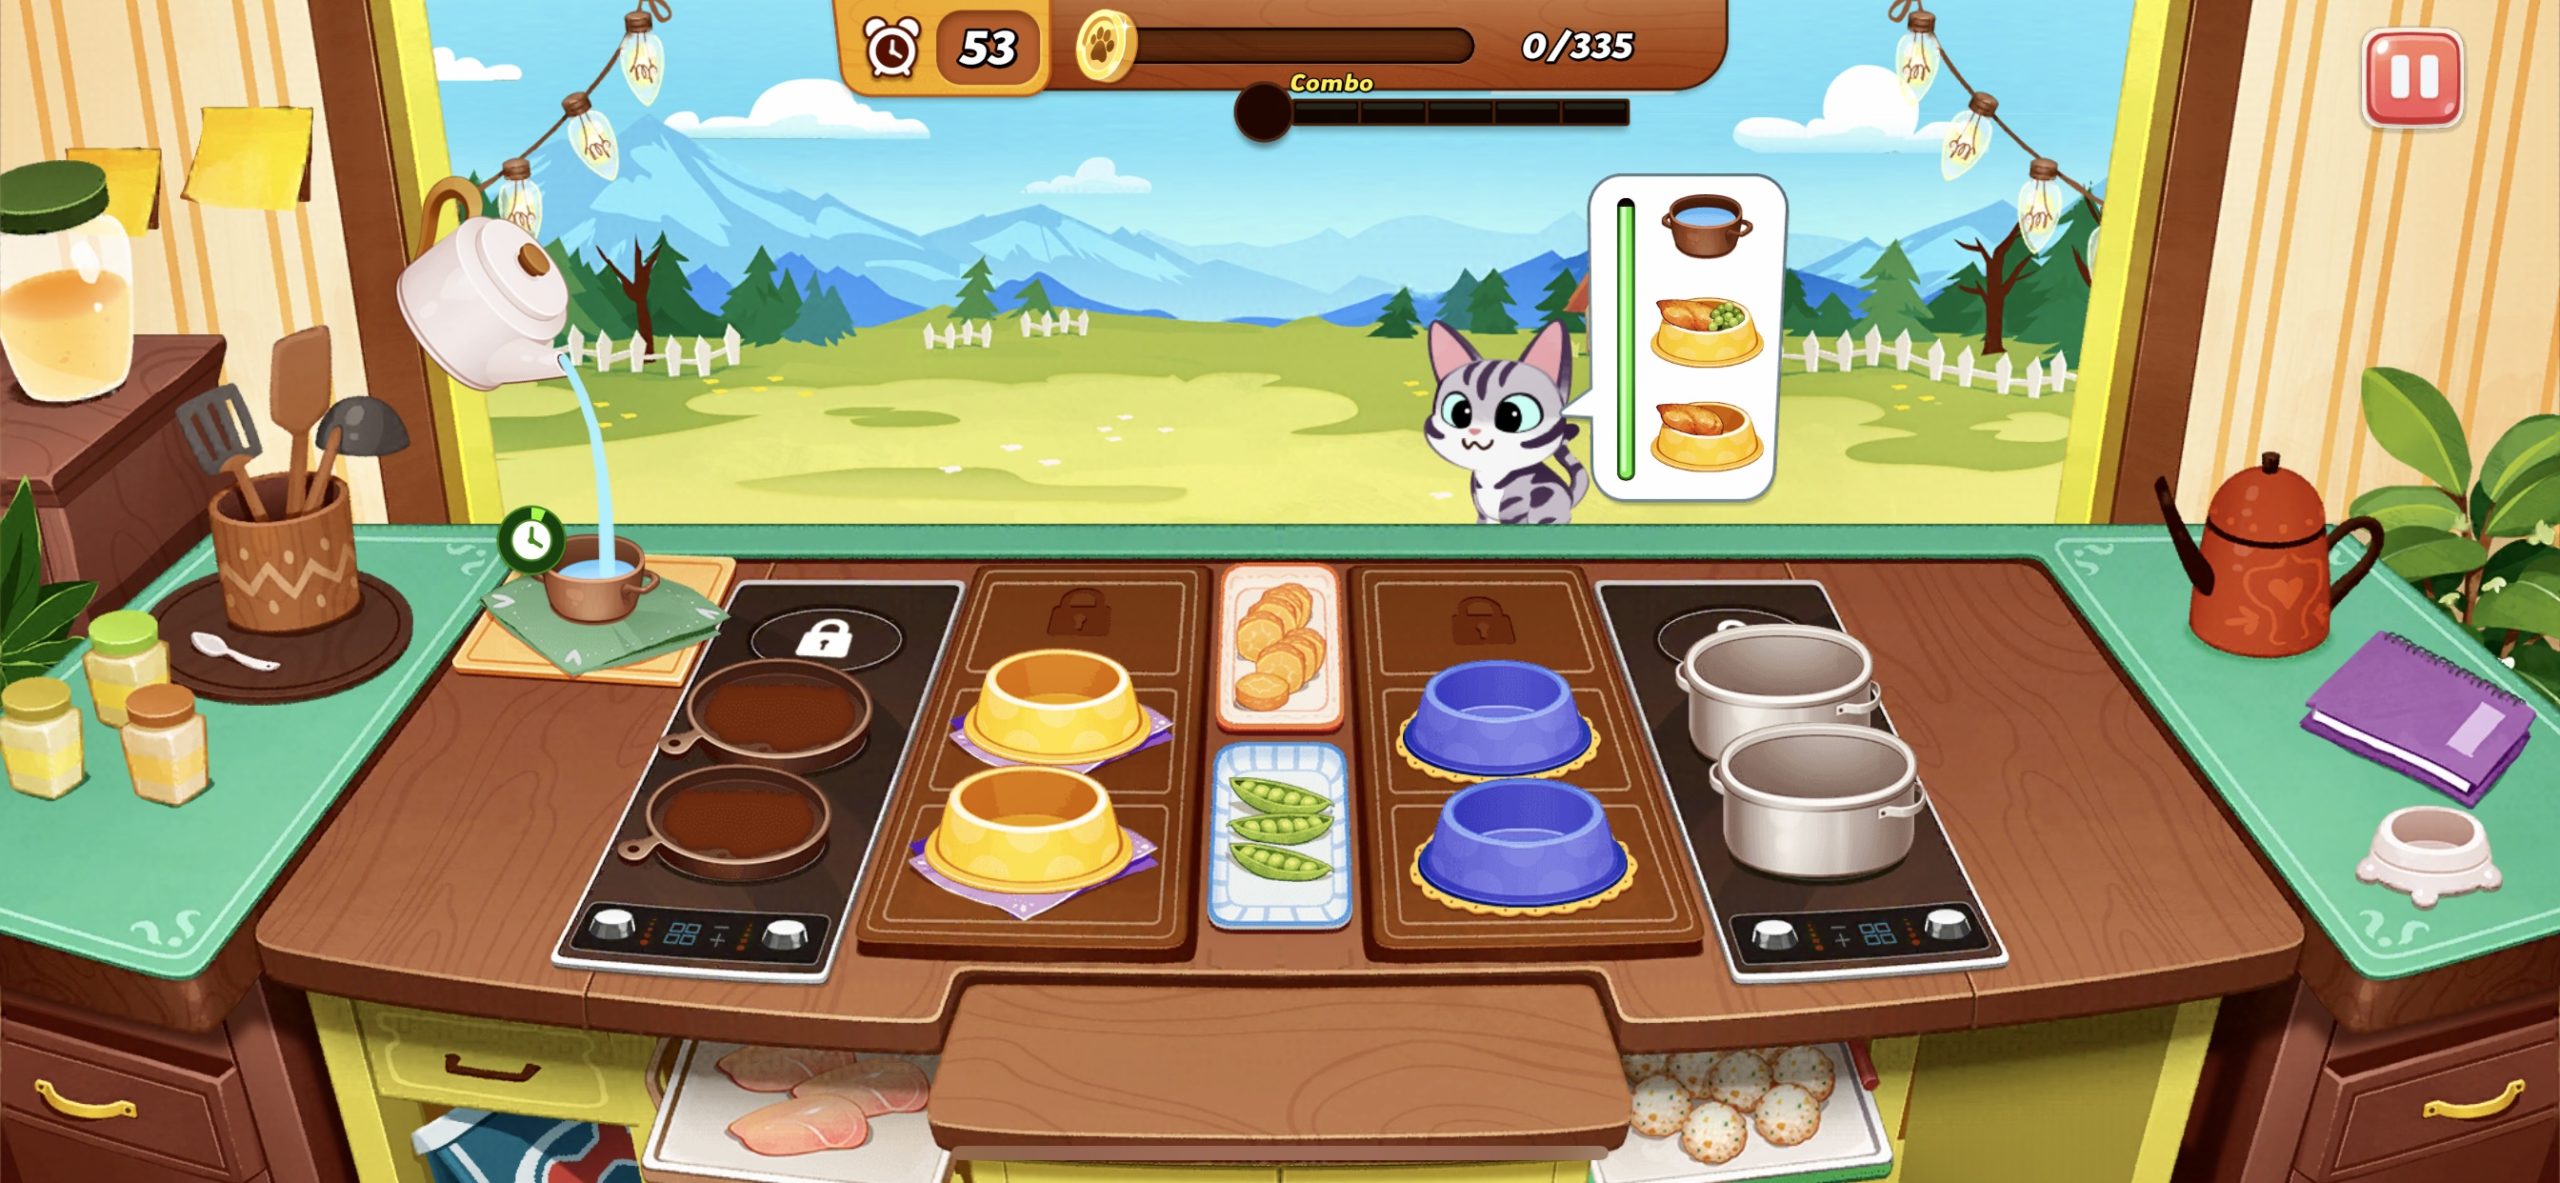 Hellopet House Review – Feed, Build, Find, Fun?